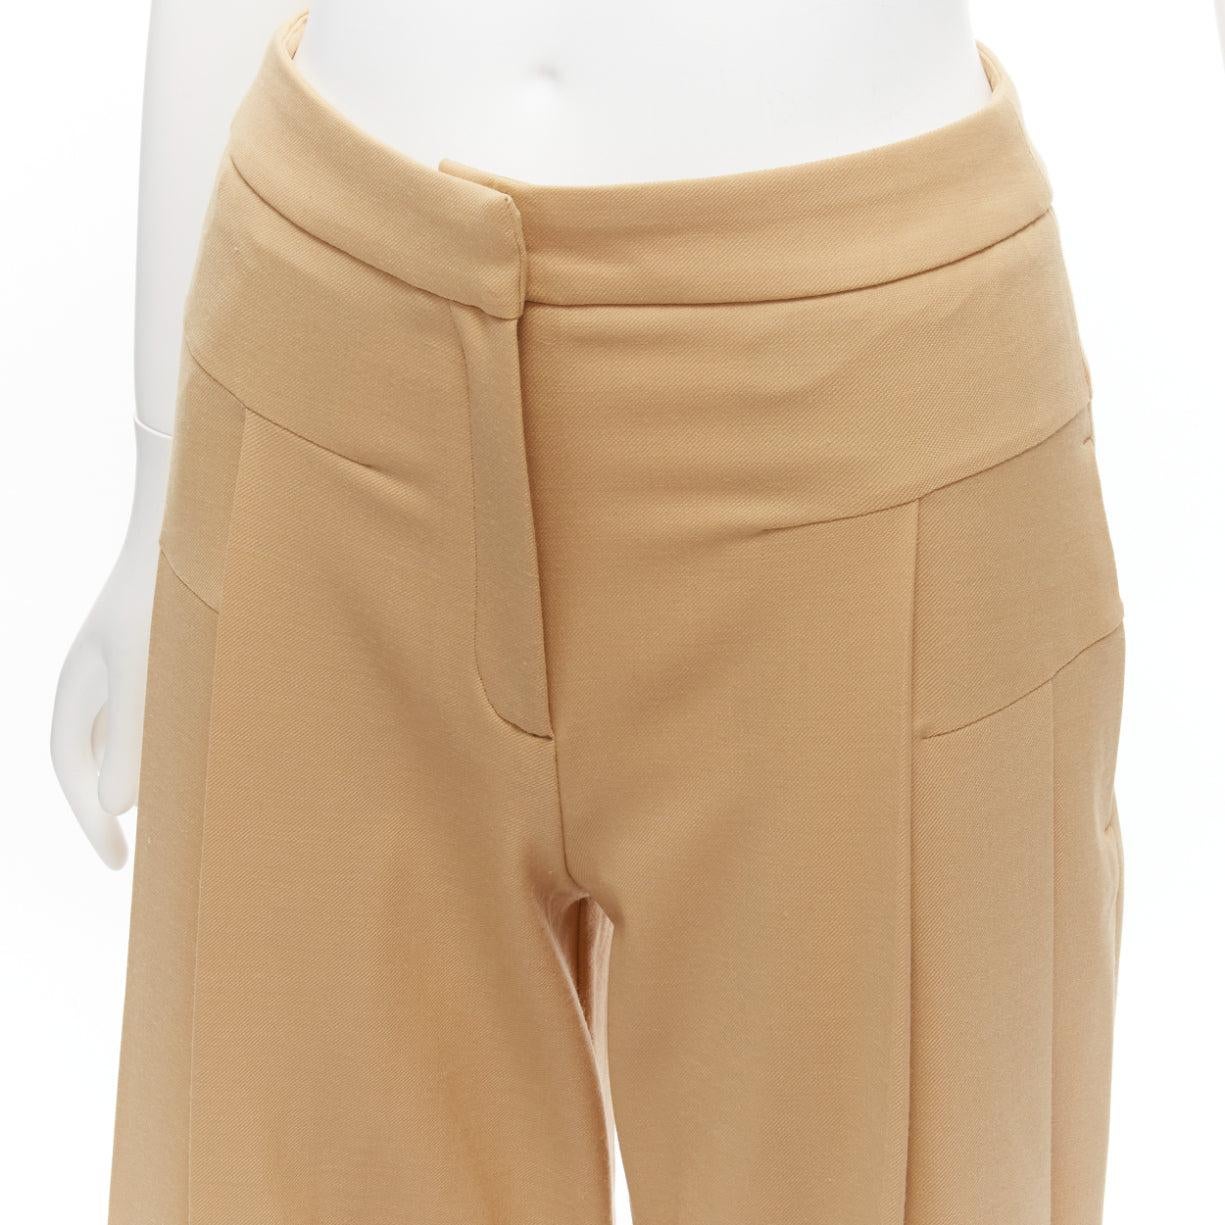 PALMER HARDING tan virgin wool blend dart pleated wide leg pants UK6 XS
Reference: SNKO/A00330
Brand: Palmer Harding
Material: Polyester, Virgin Wool, Blend
Color: Tan Brown
Pattern: Solid
Closure: Zip Fly
Extra Details: Darts merged into seams at